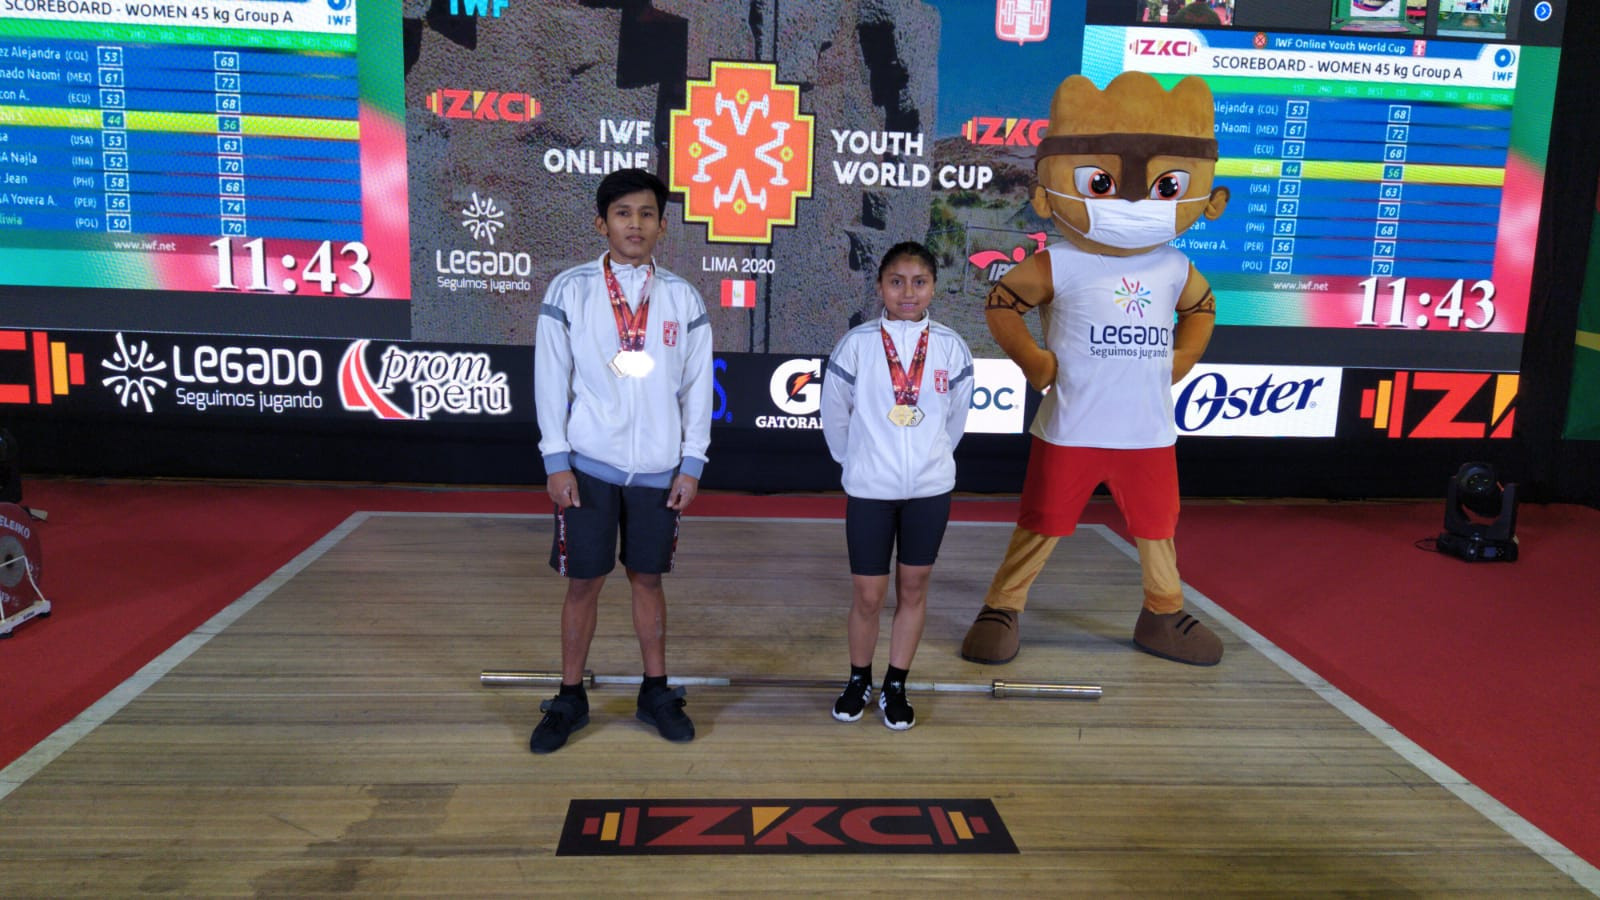 Peru won a total of five gold medals on day one of the IWF Online Youth World Cup ©IWF